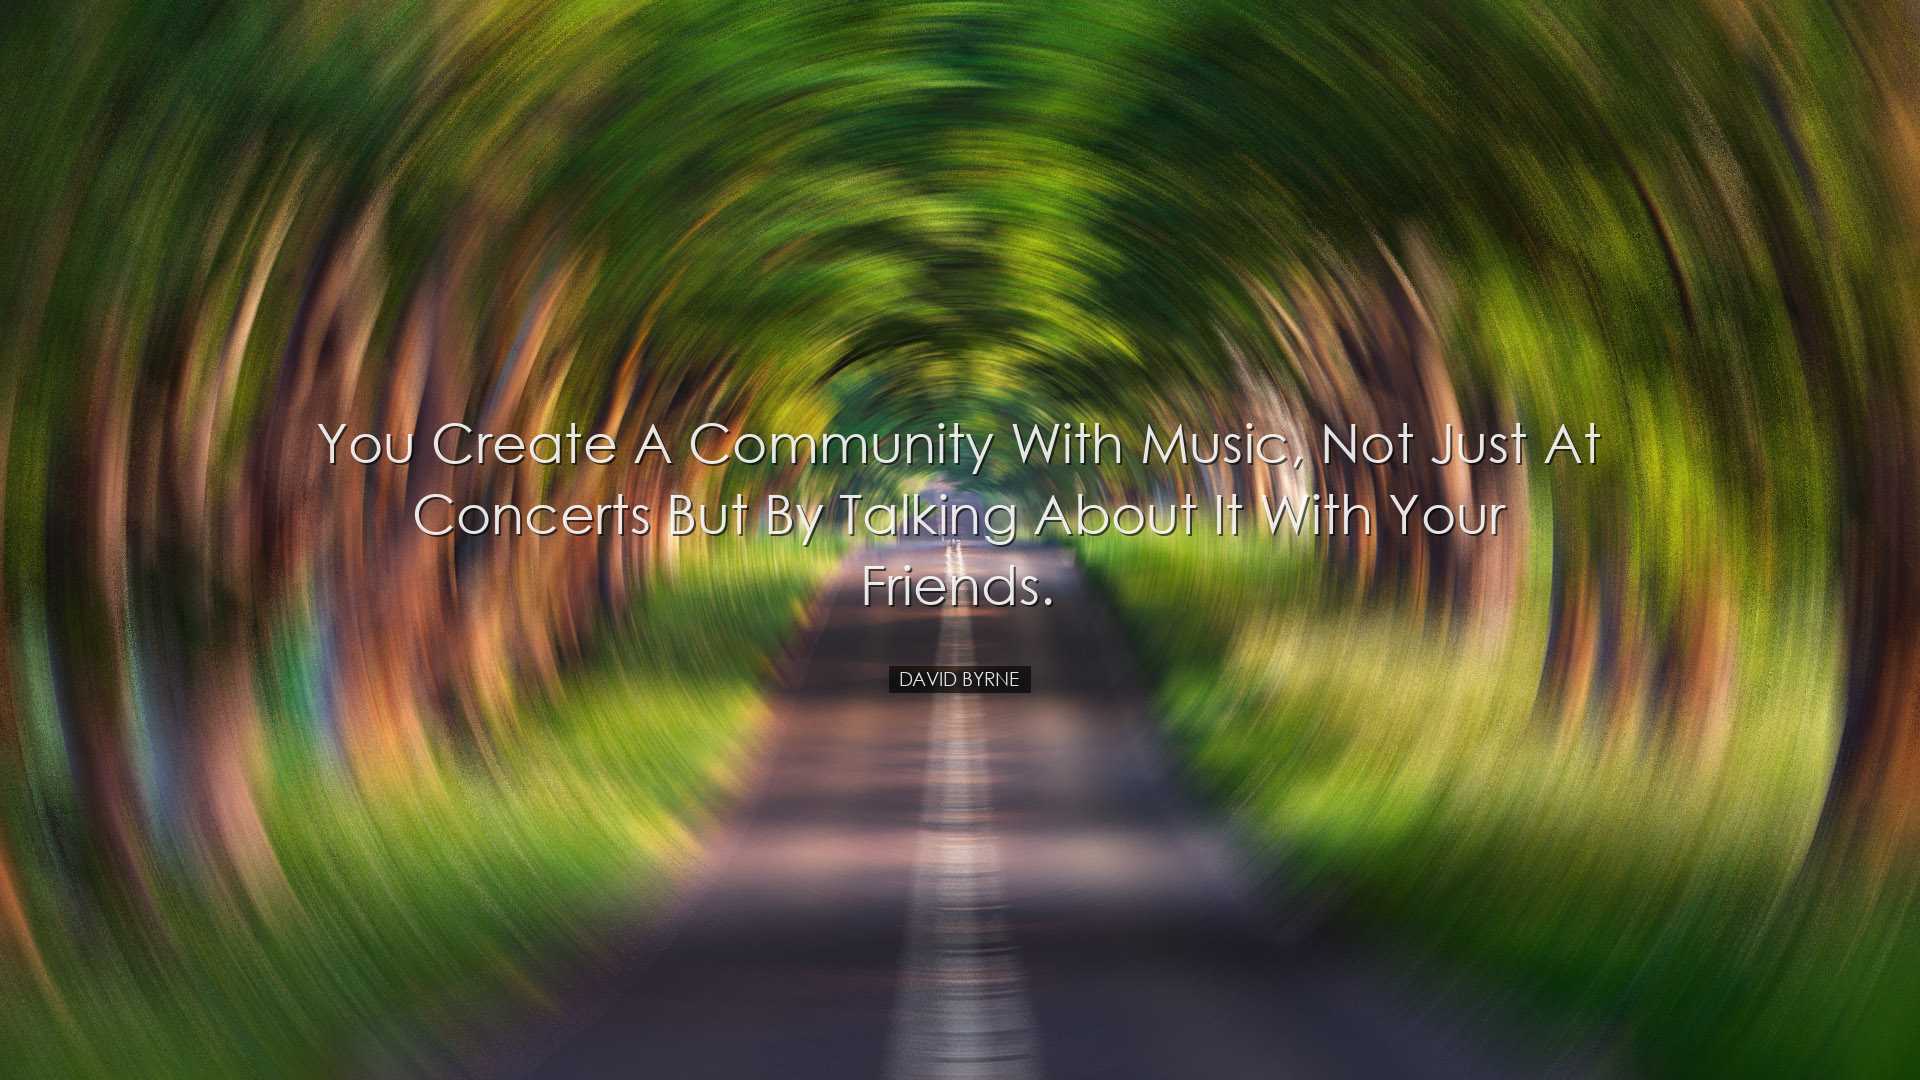 You create a community with music, not just at concerts but by tal